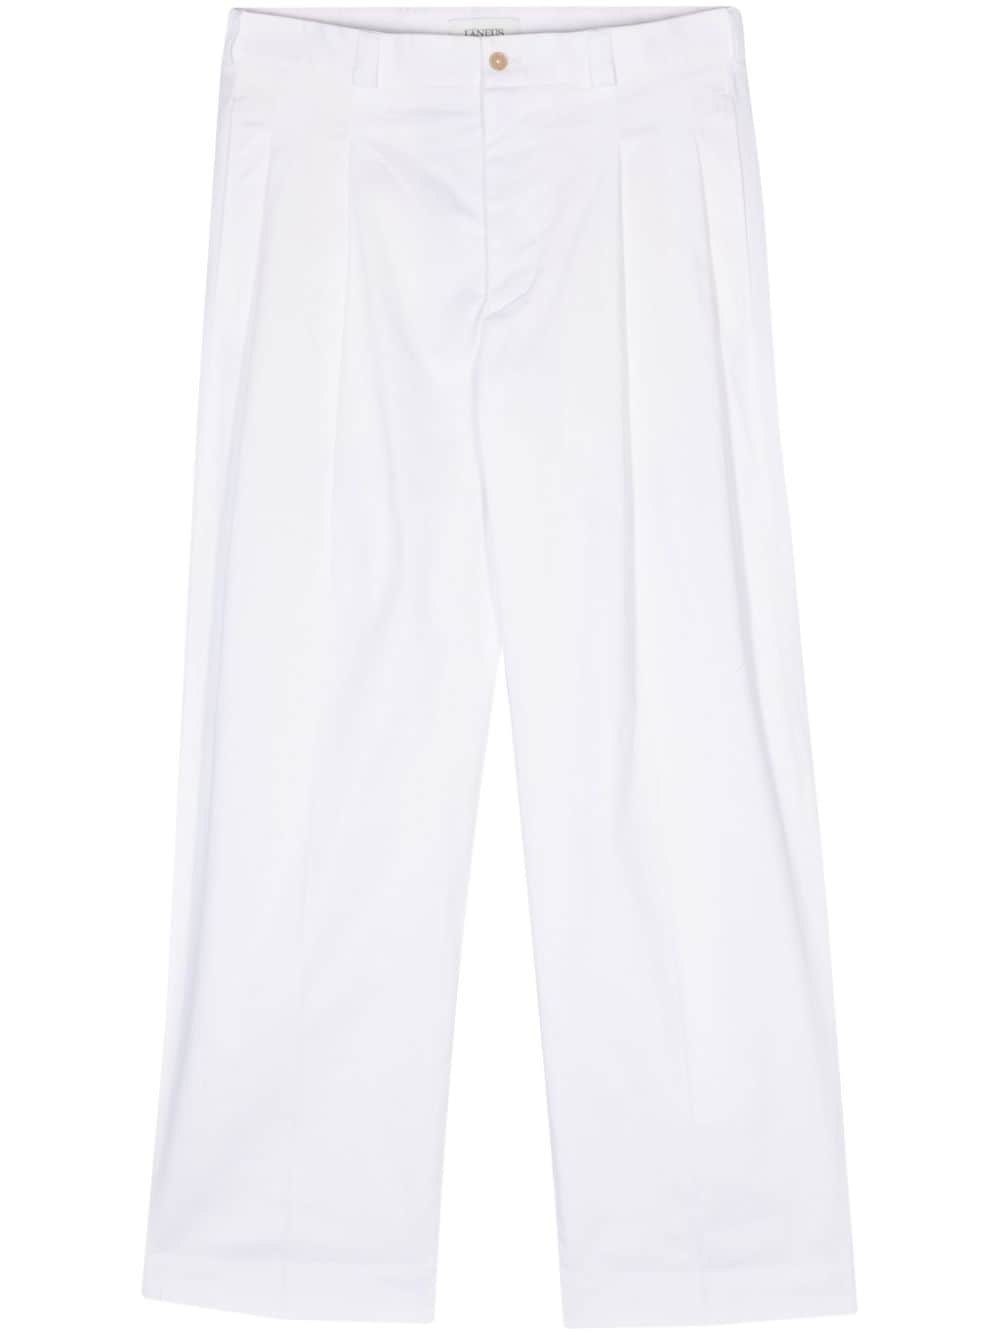 Laneus Pleat-detailed Tailored Trousers In White